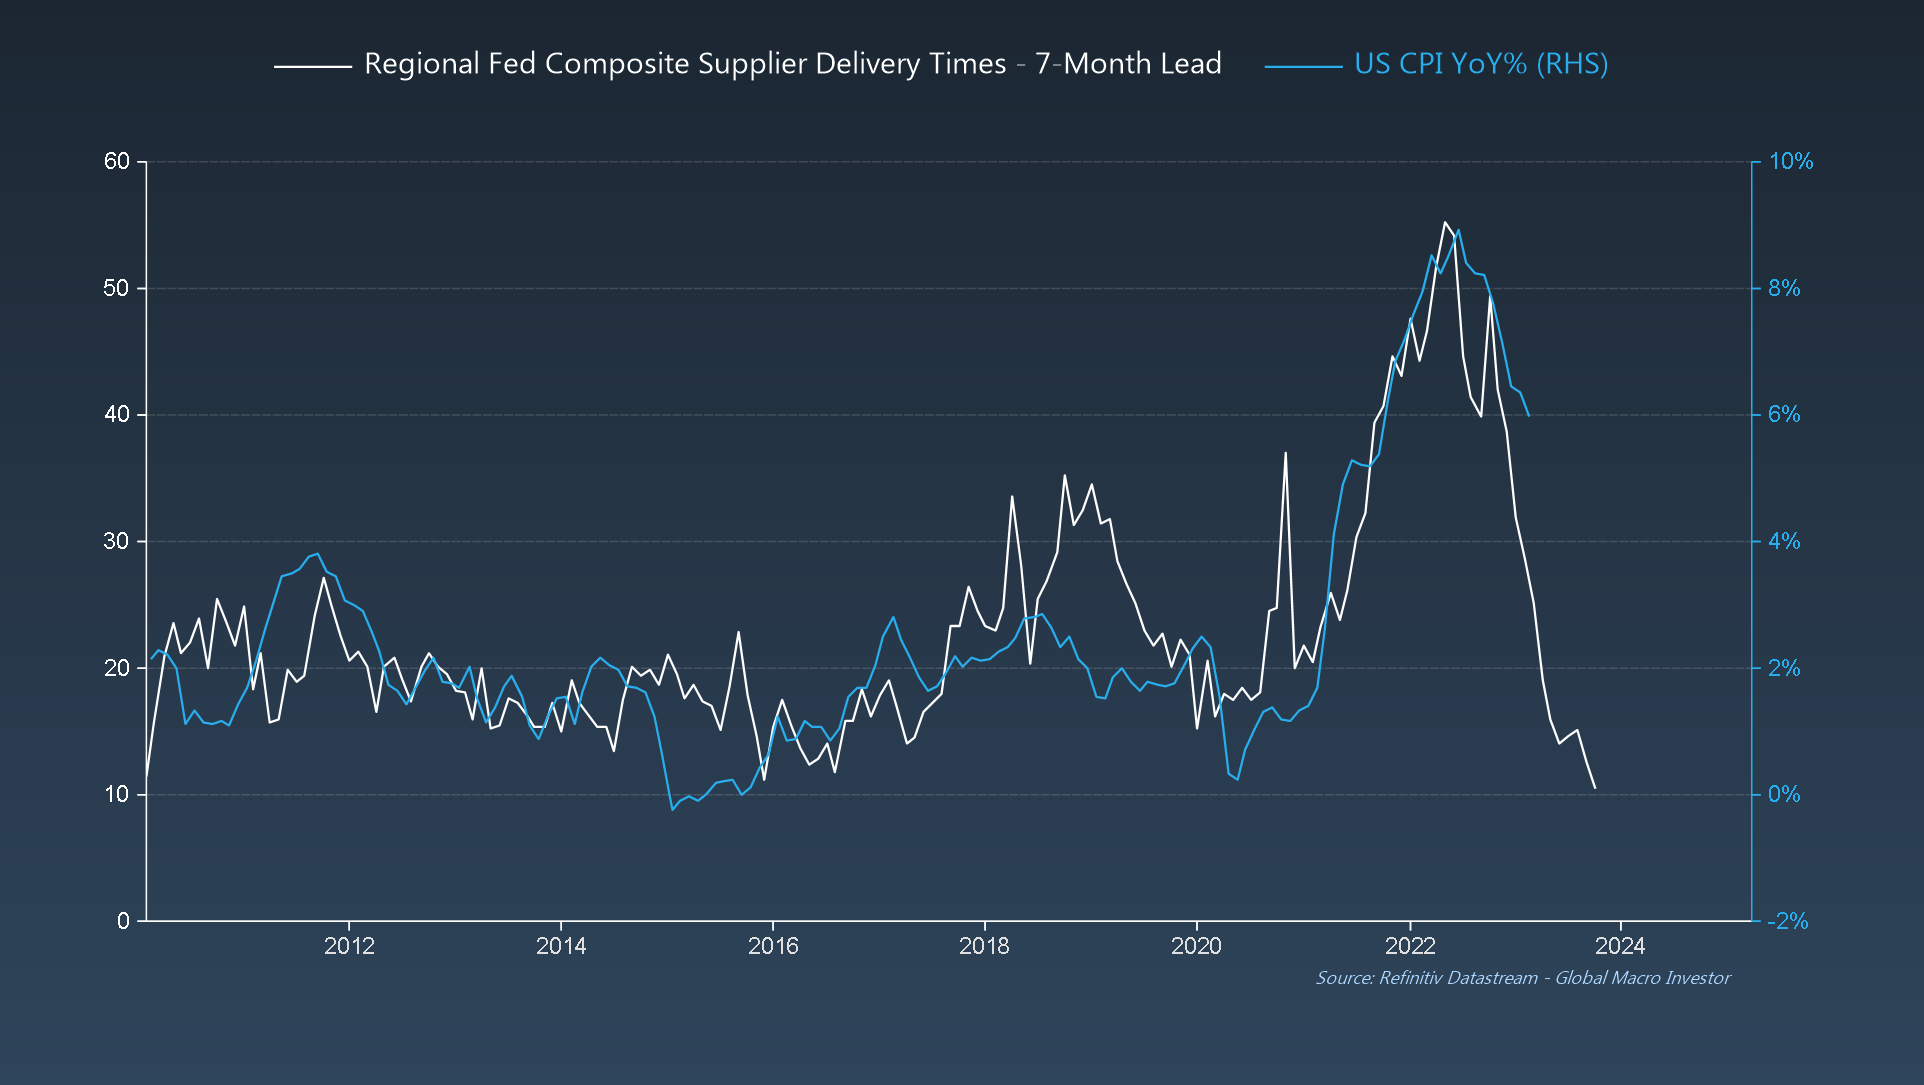 Regional Fed Supplier Delivery Times vs. US CPI